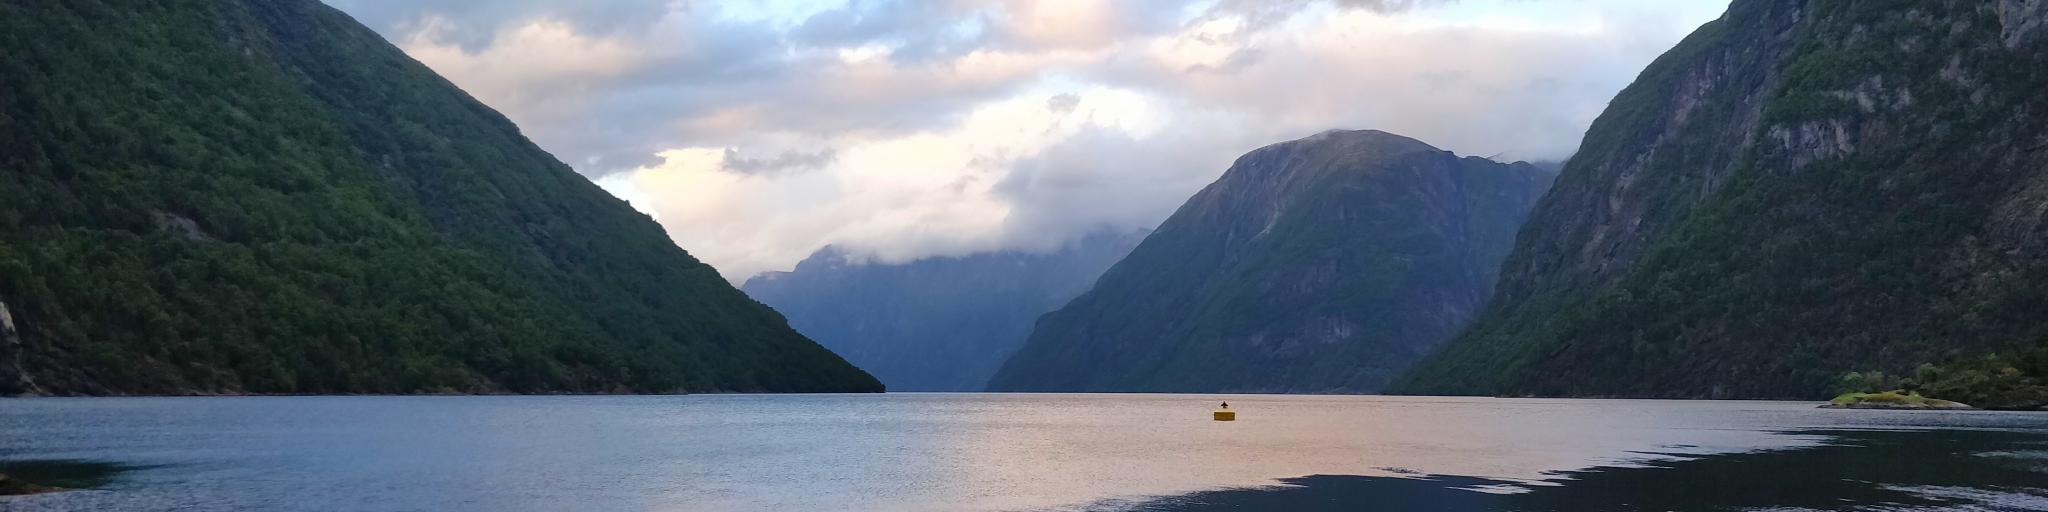 Clouds and mountains reflect in the fjord's water in Hellesylt, Norway